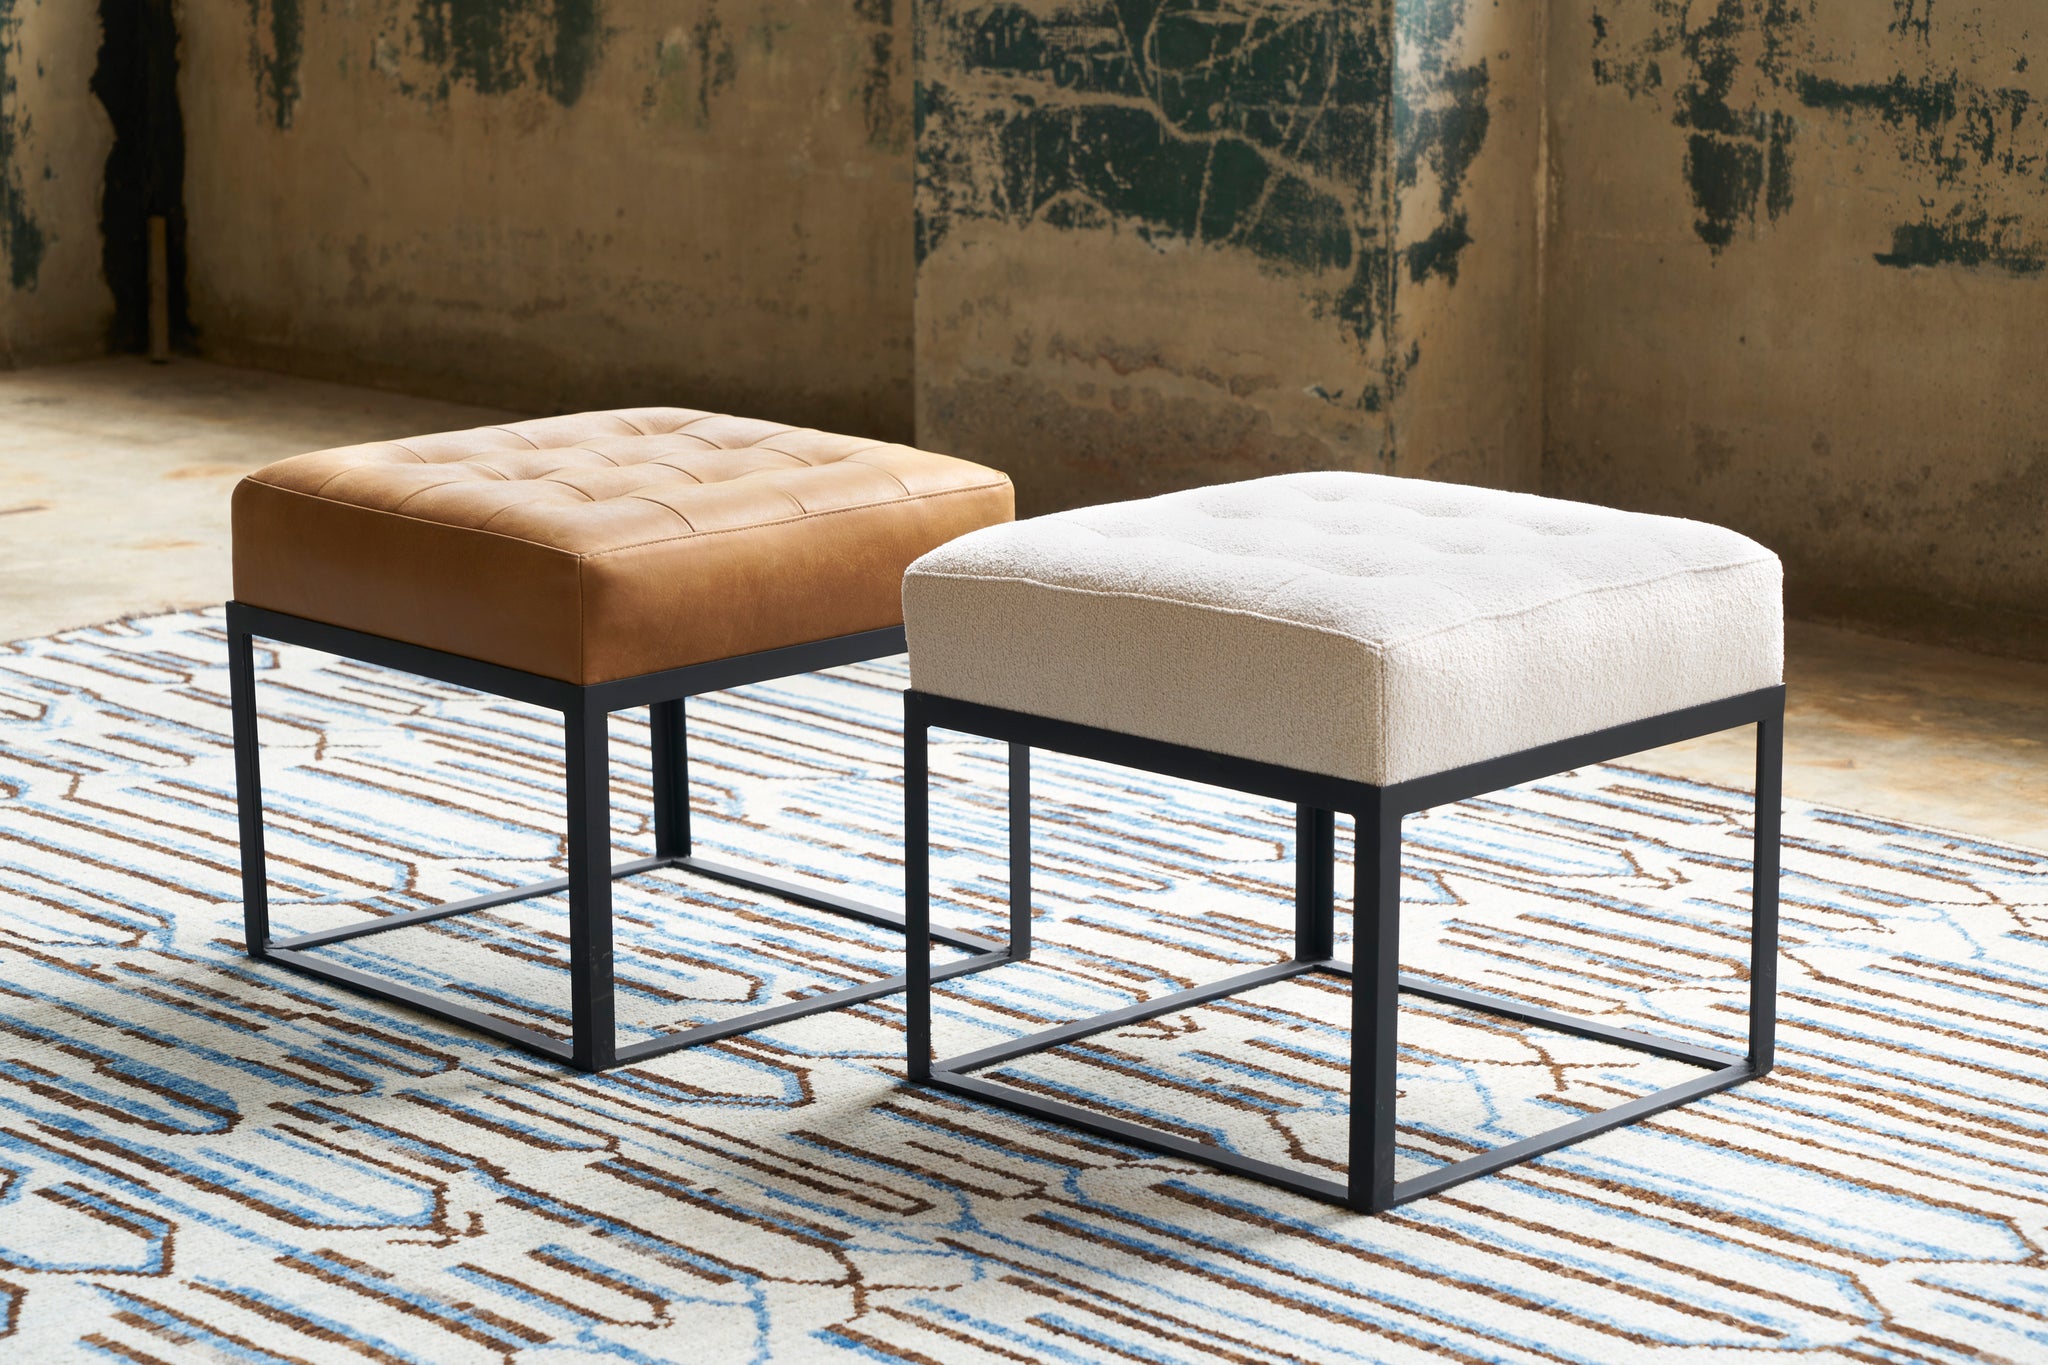  Cruz Ottomans in a showroom on a blue and brown rug. Photographed in Marvell Chestnut and Lumi Bone 